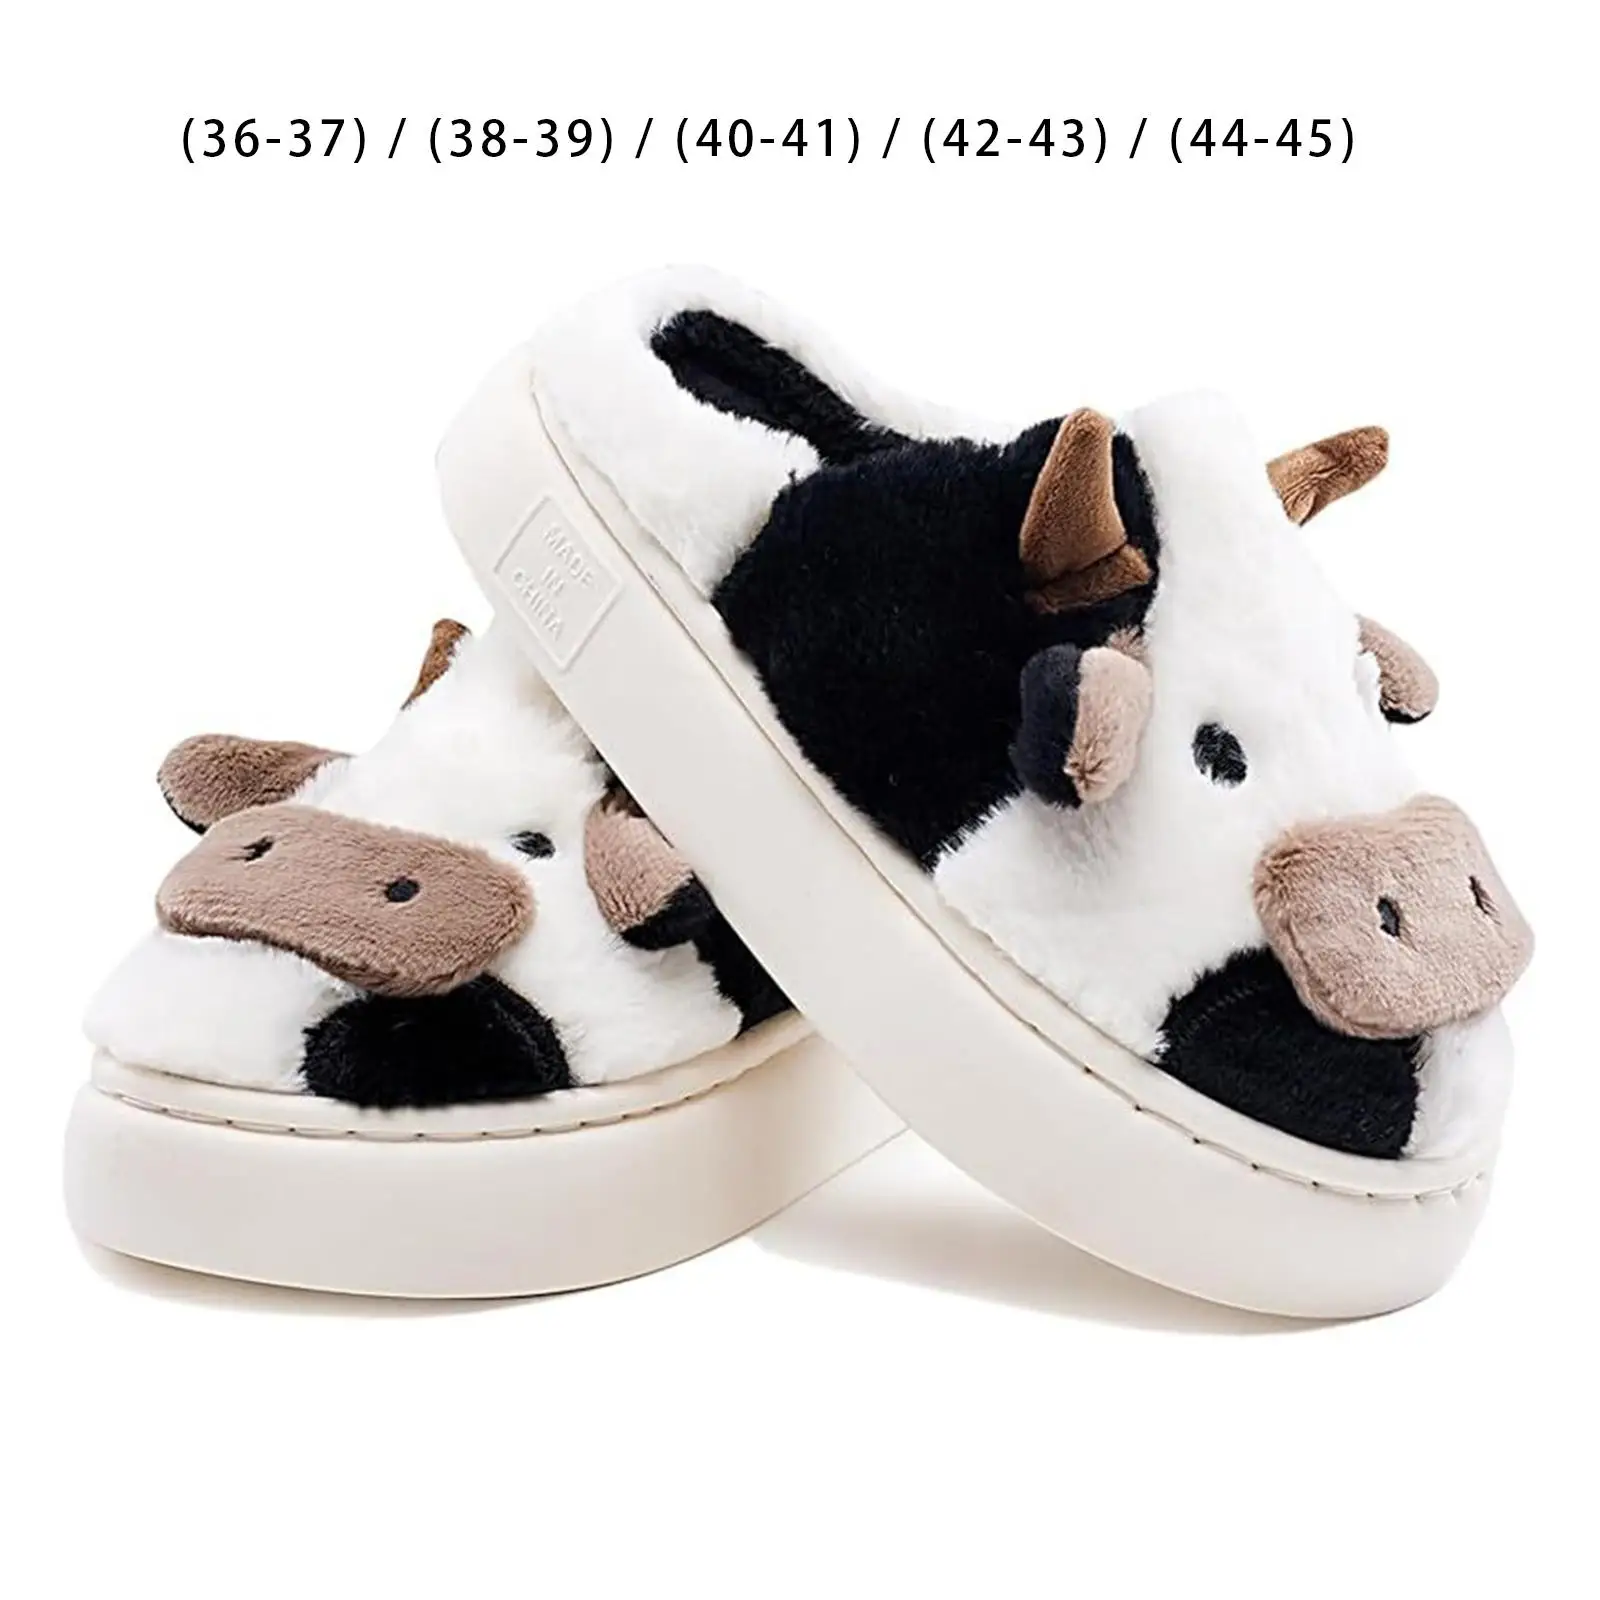 Winter Cow Plush Slippers Portable Casual Novelty Comfortable Animal Indoor Shoes for Bedroom Travel Dorm Family Members Ladies